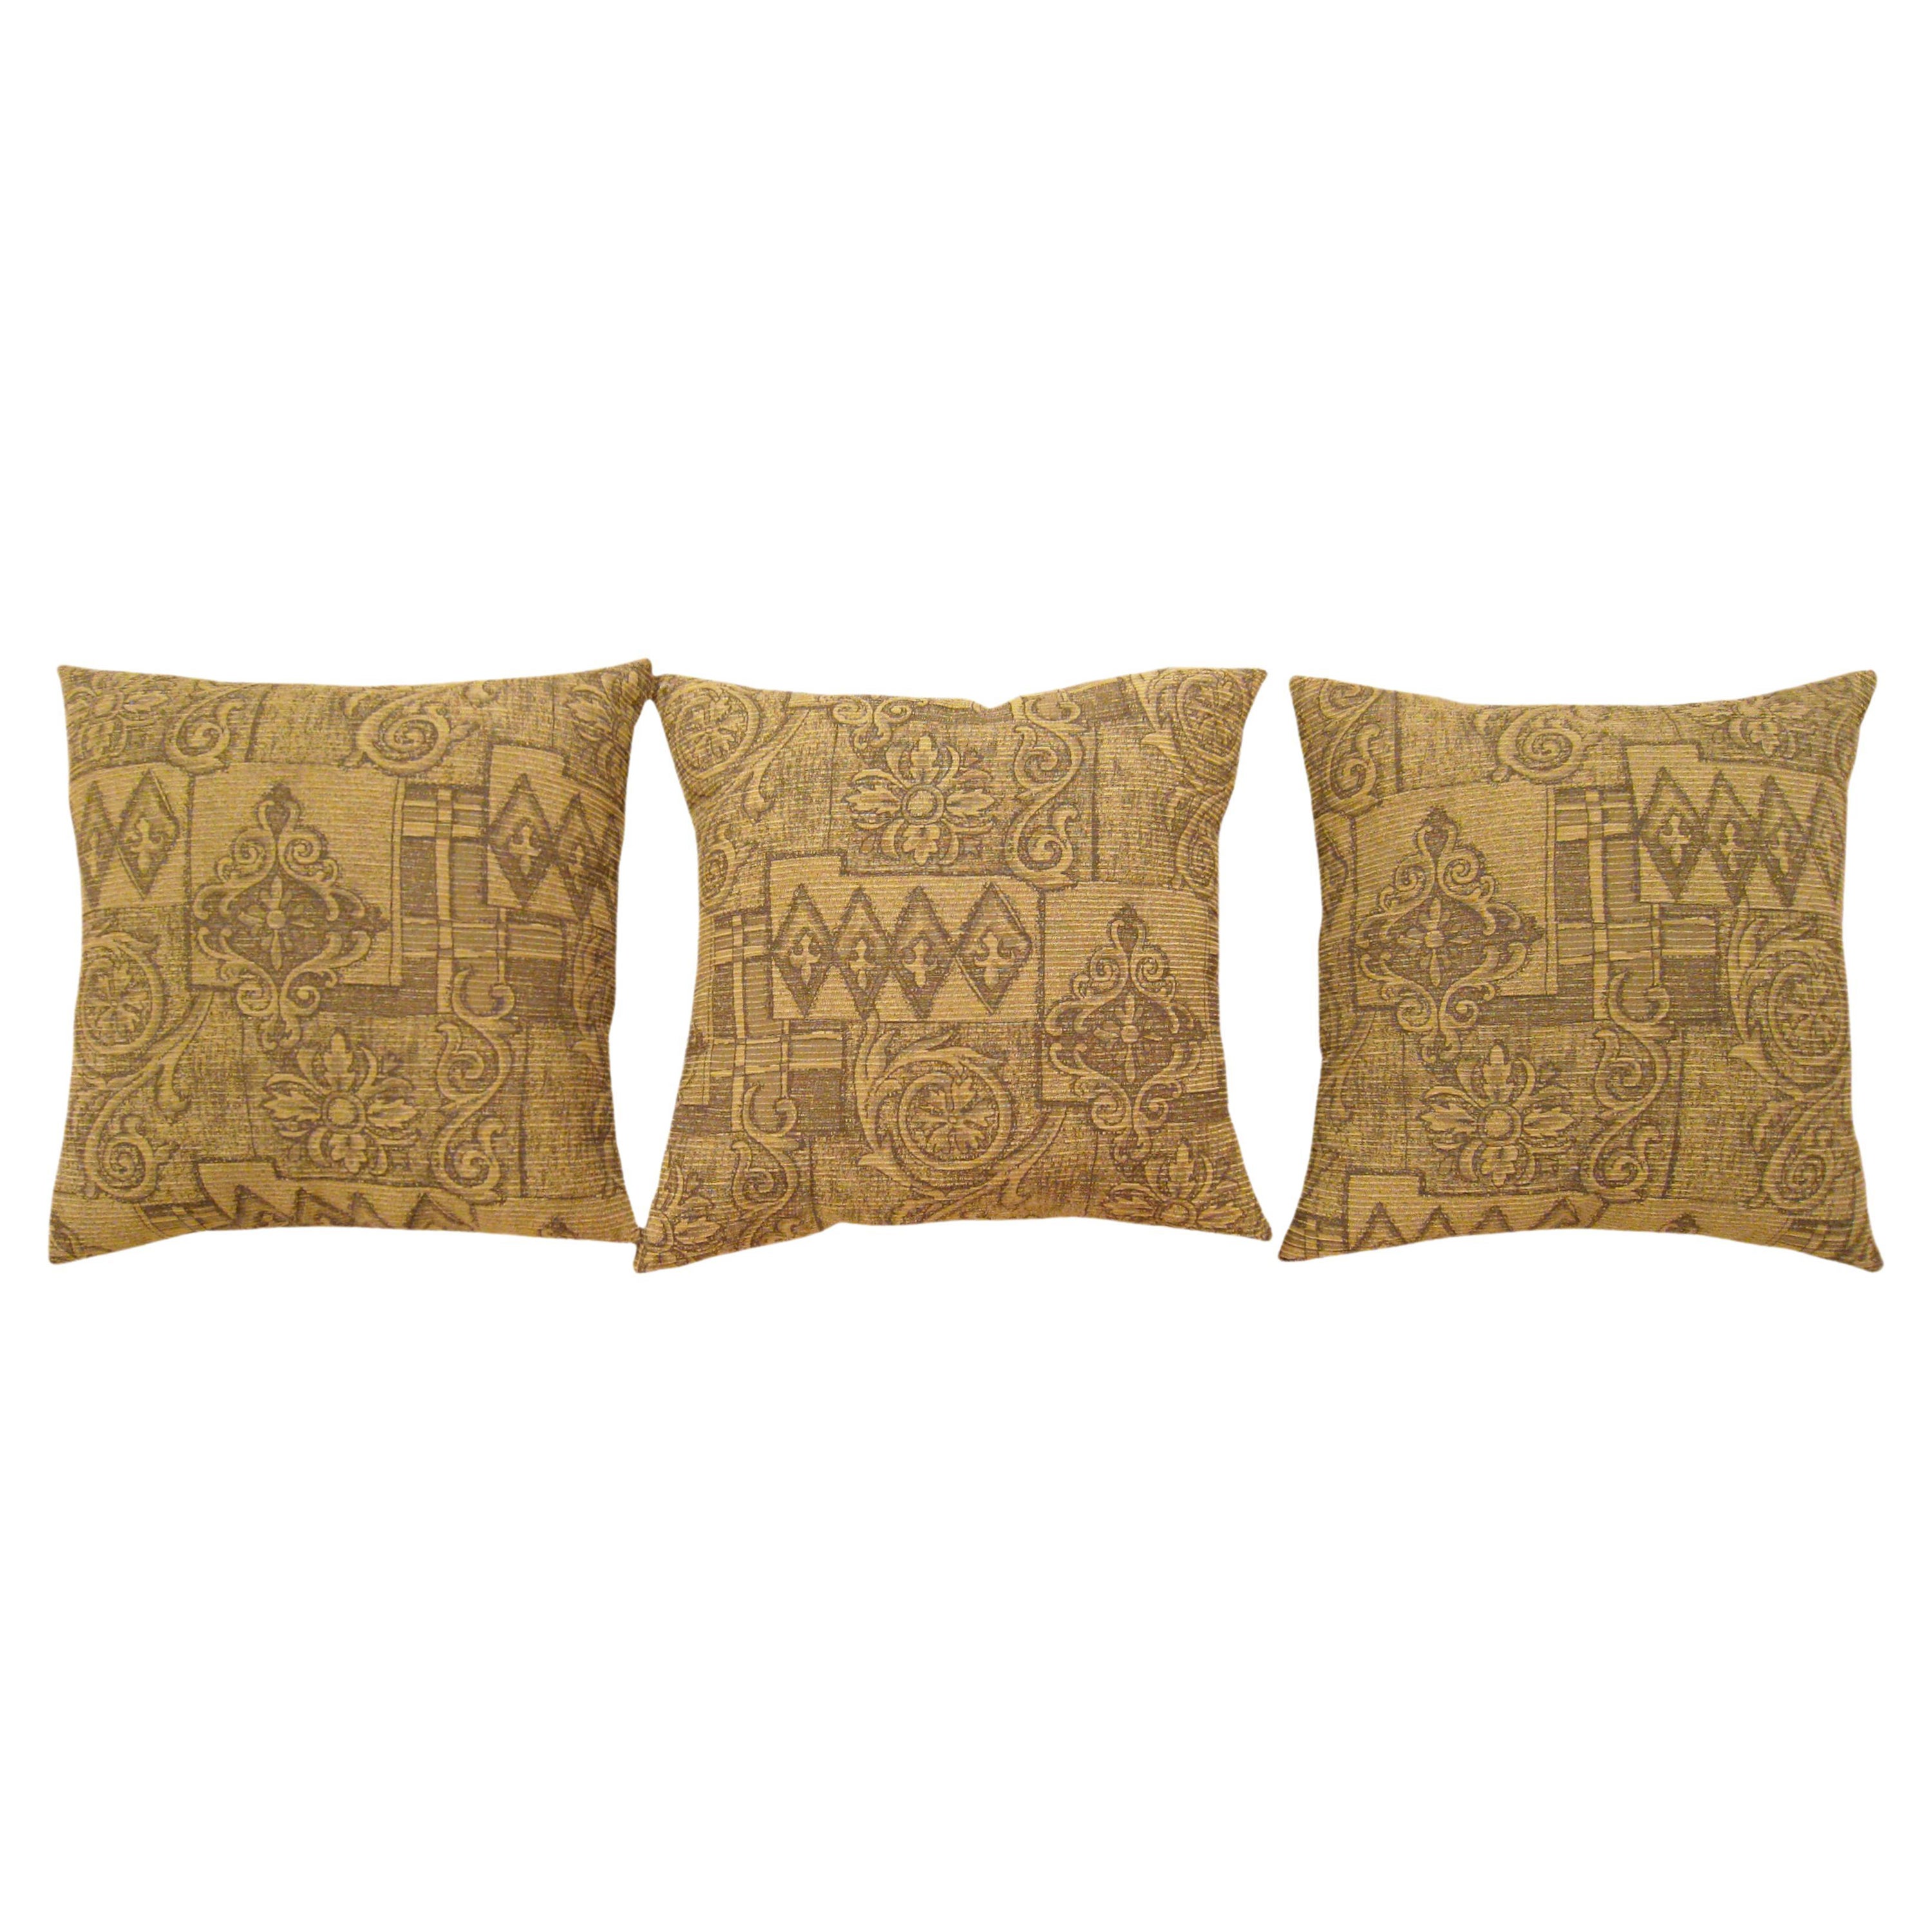 A Set of Three Decorative Vintage Floro-Geometric Double-Sided Fabric Pillows For Sale